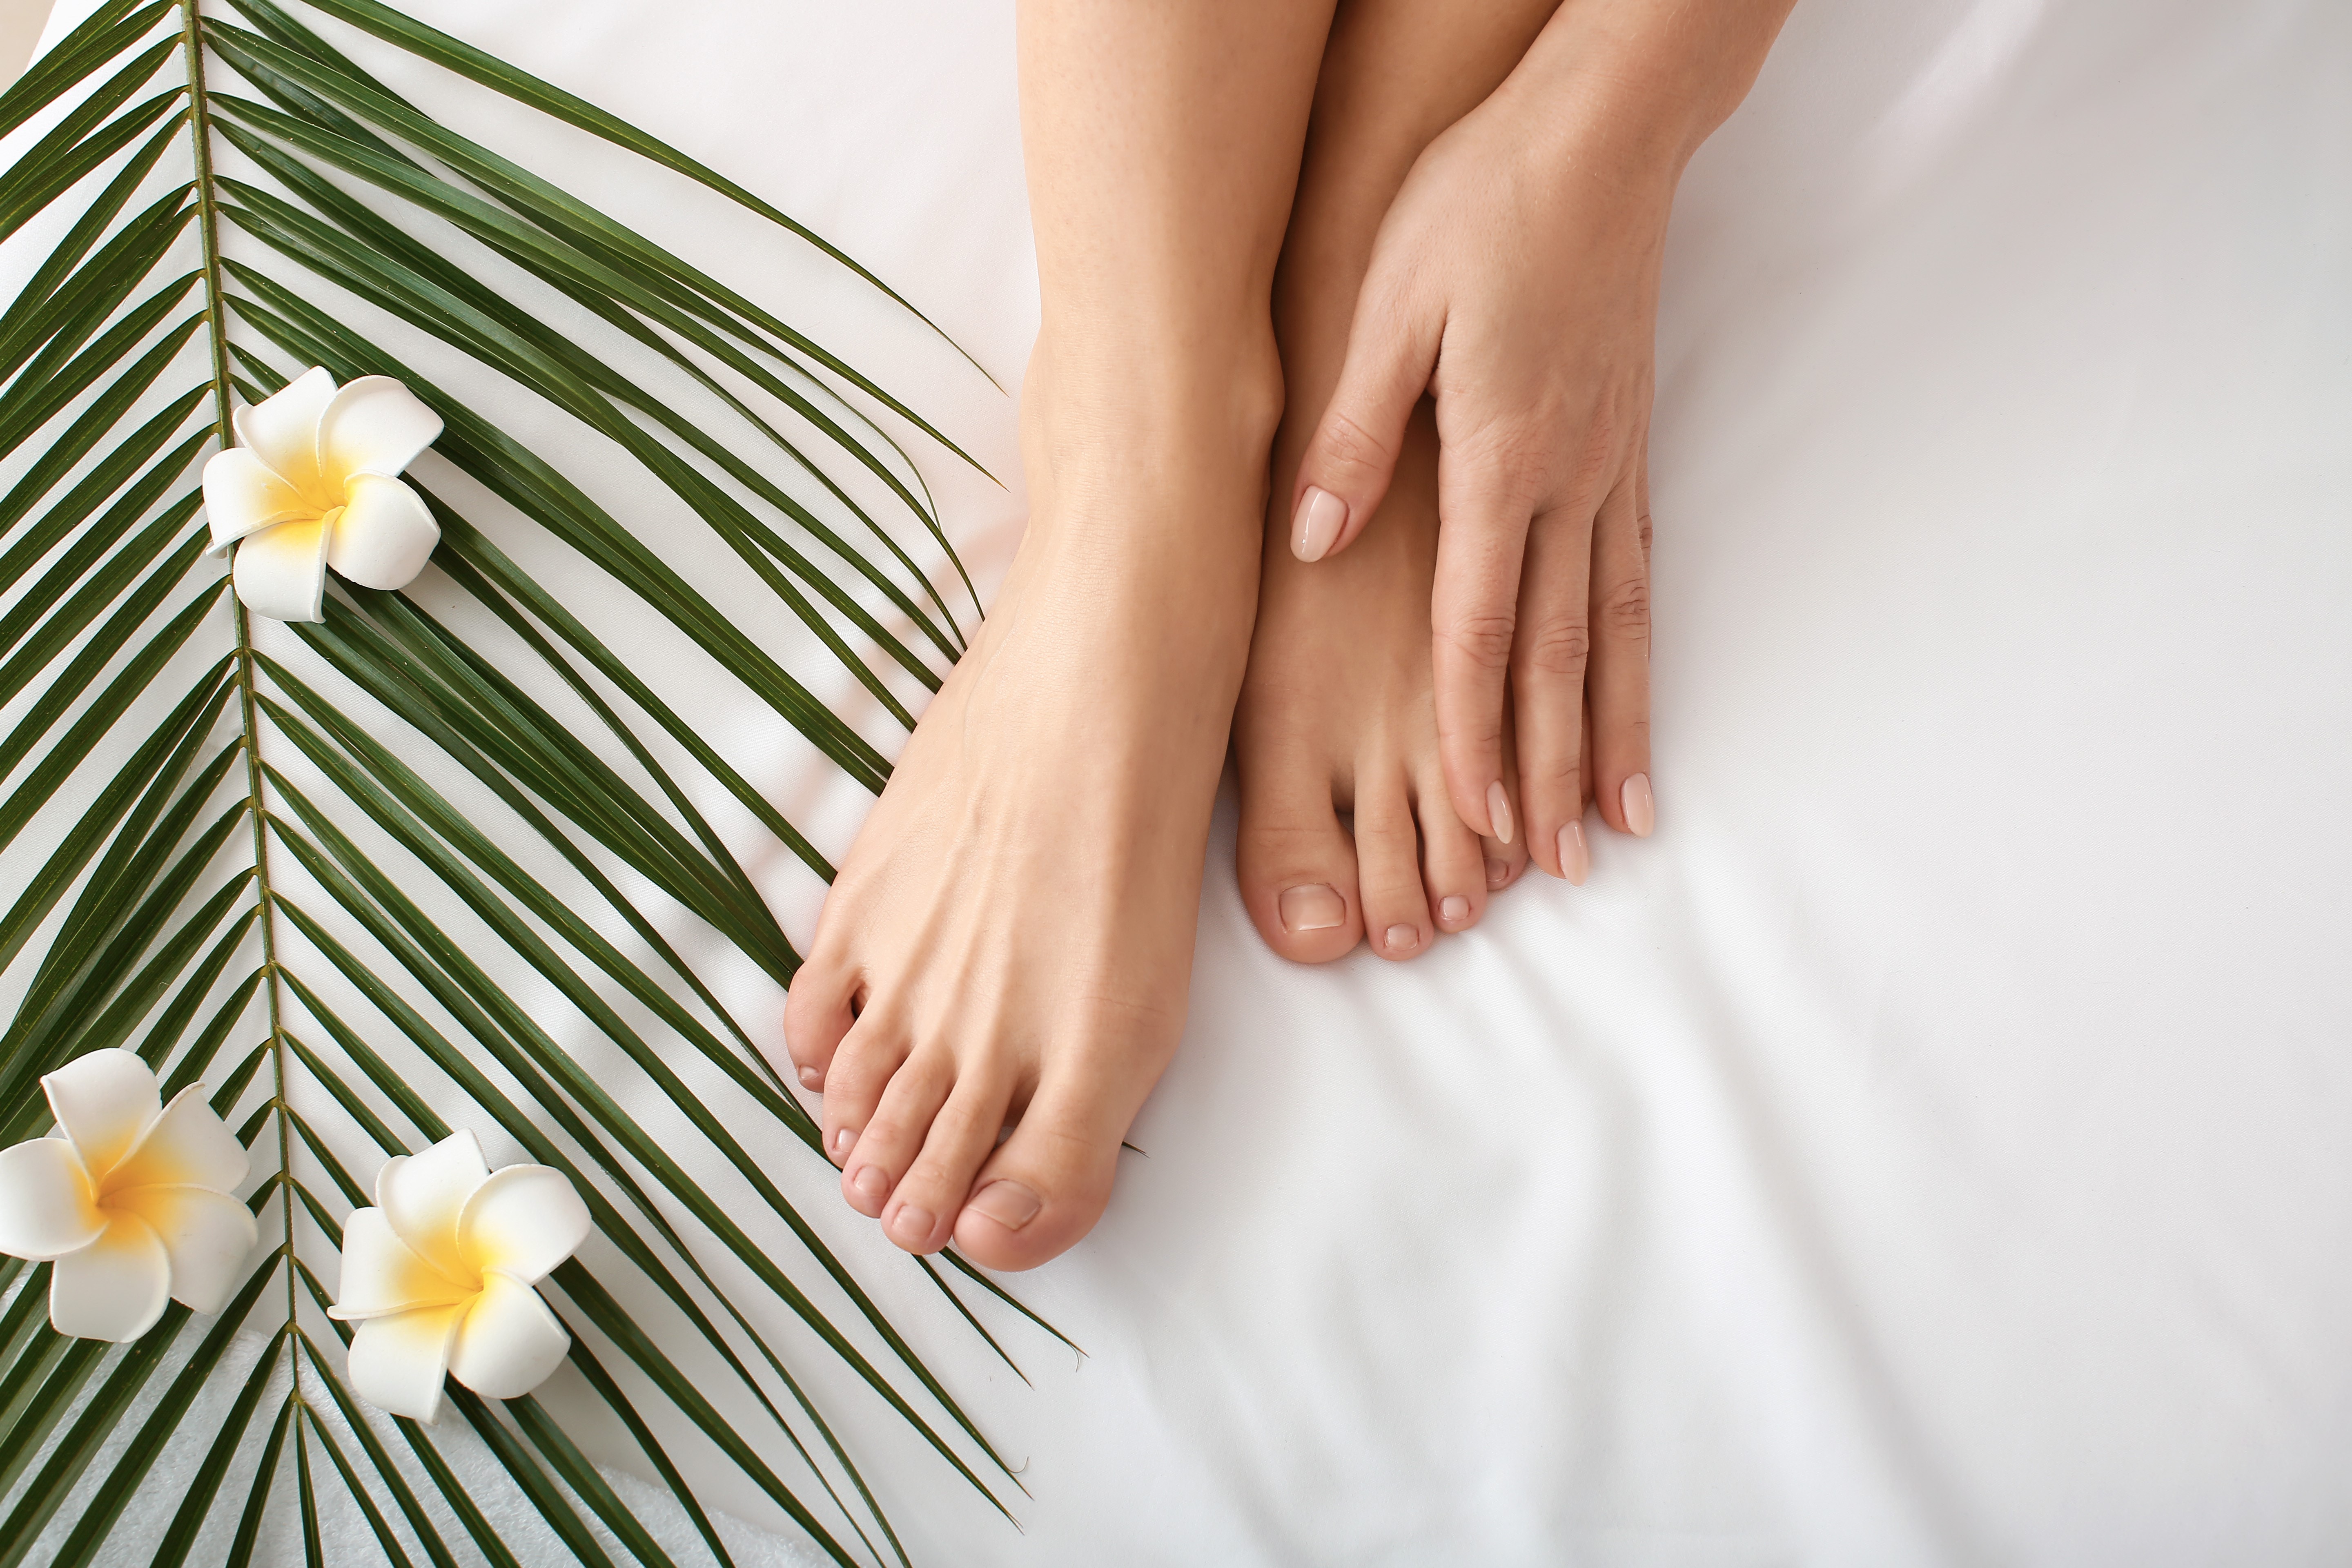 Header photo with bare feet on a white blanket with a palm branch and yellow flowers